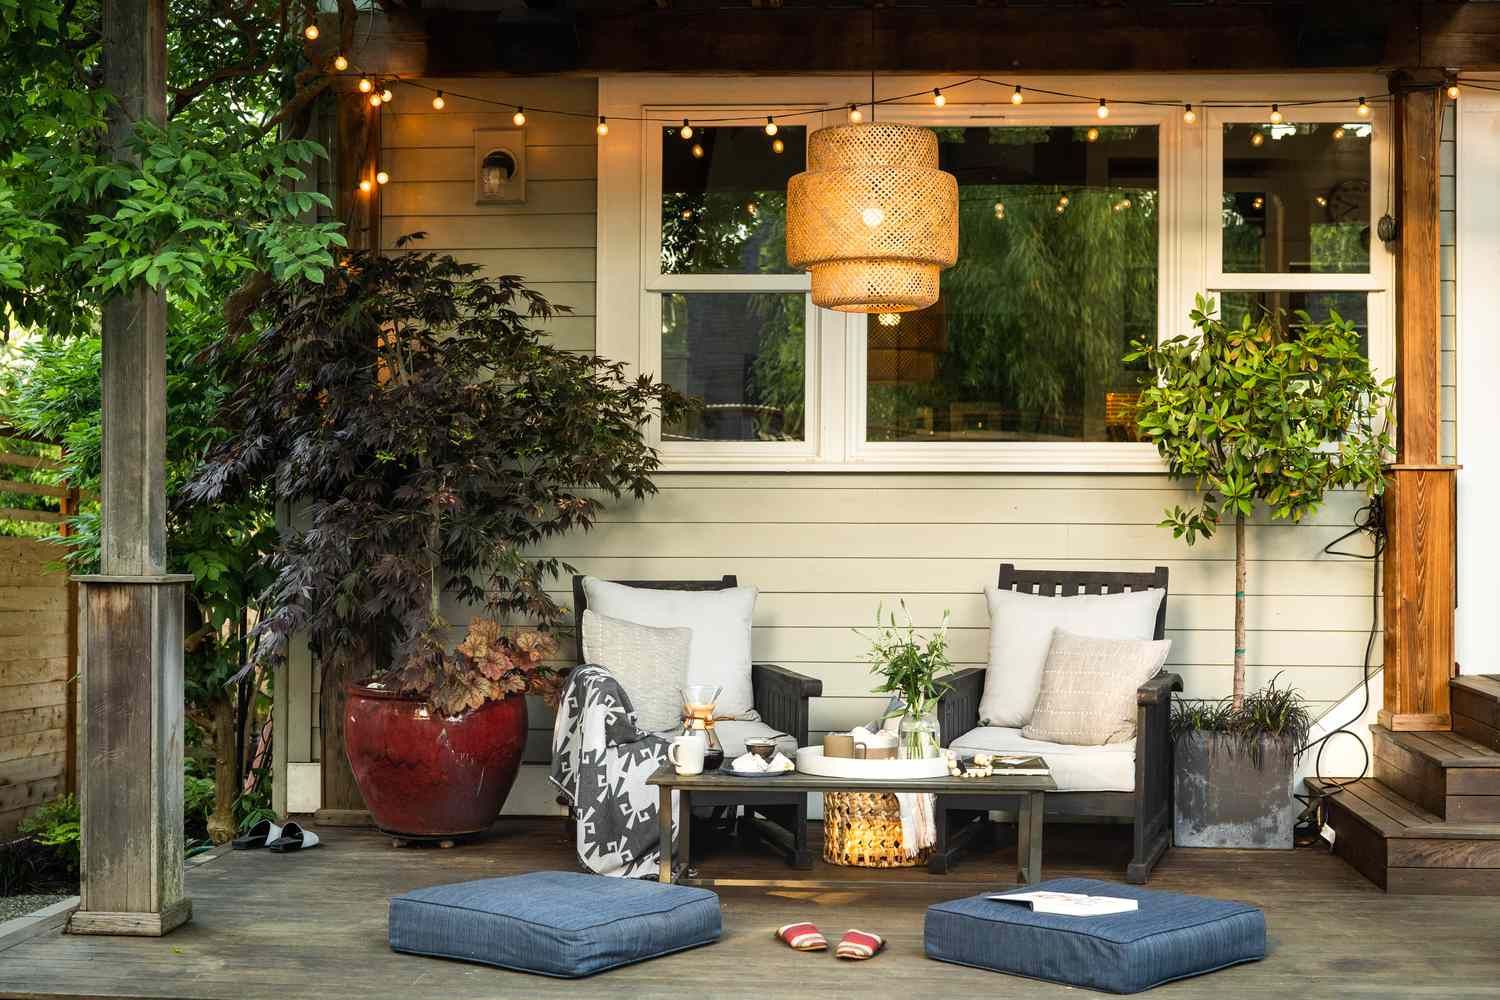 30 Ideas That Prove Small Decks Can Be Beautiful And Functional With Balcony And Deck With Soft Cushions (View 2 of 15)